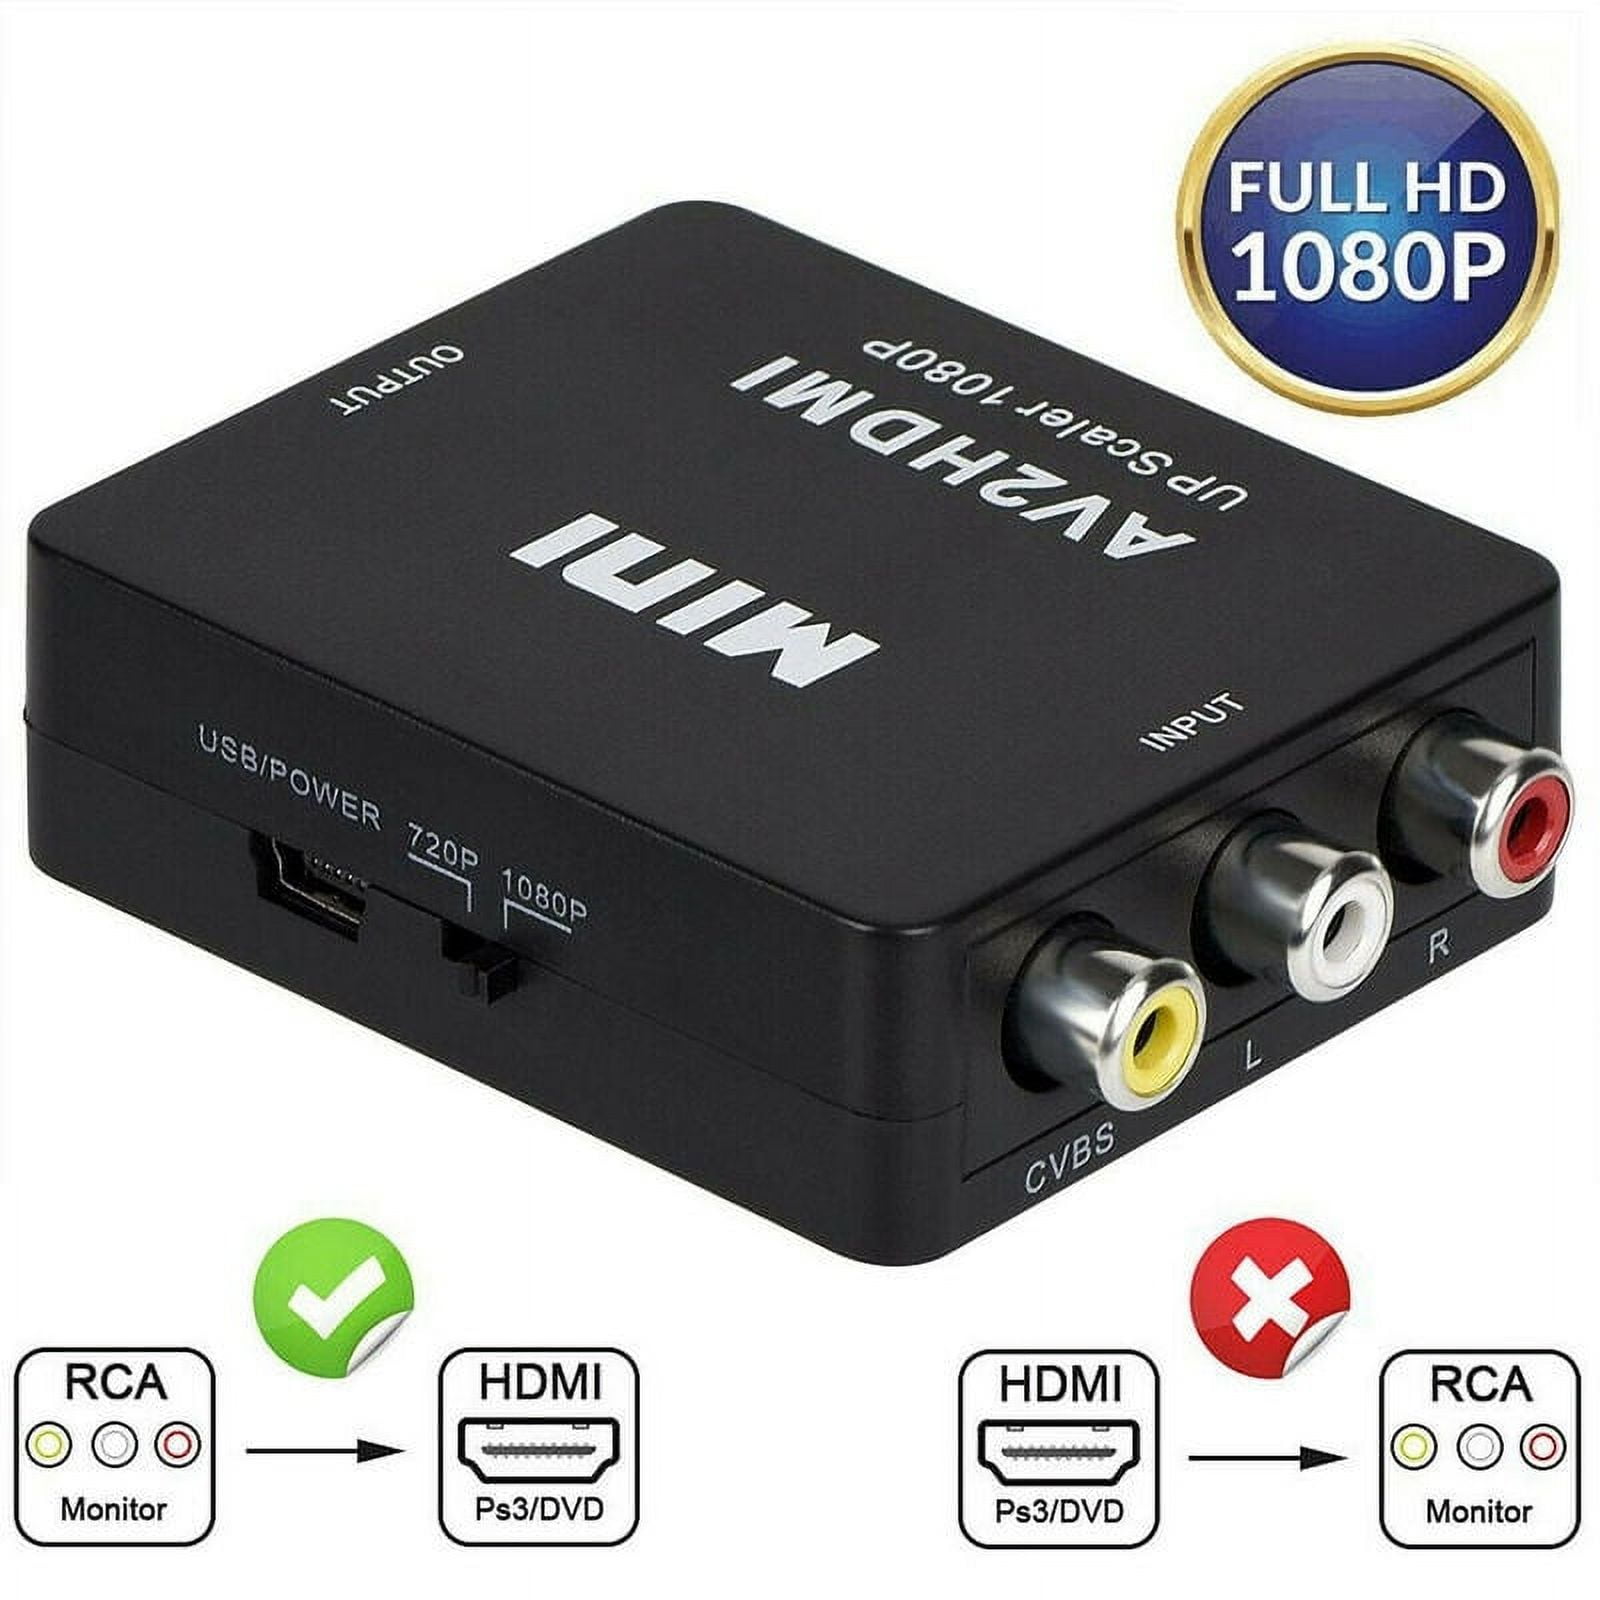 AV to HDMI Converter HDMI 1080P 720P for set-top box computer to TV cable  three